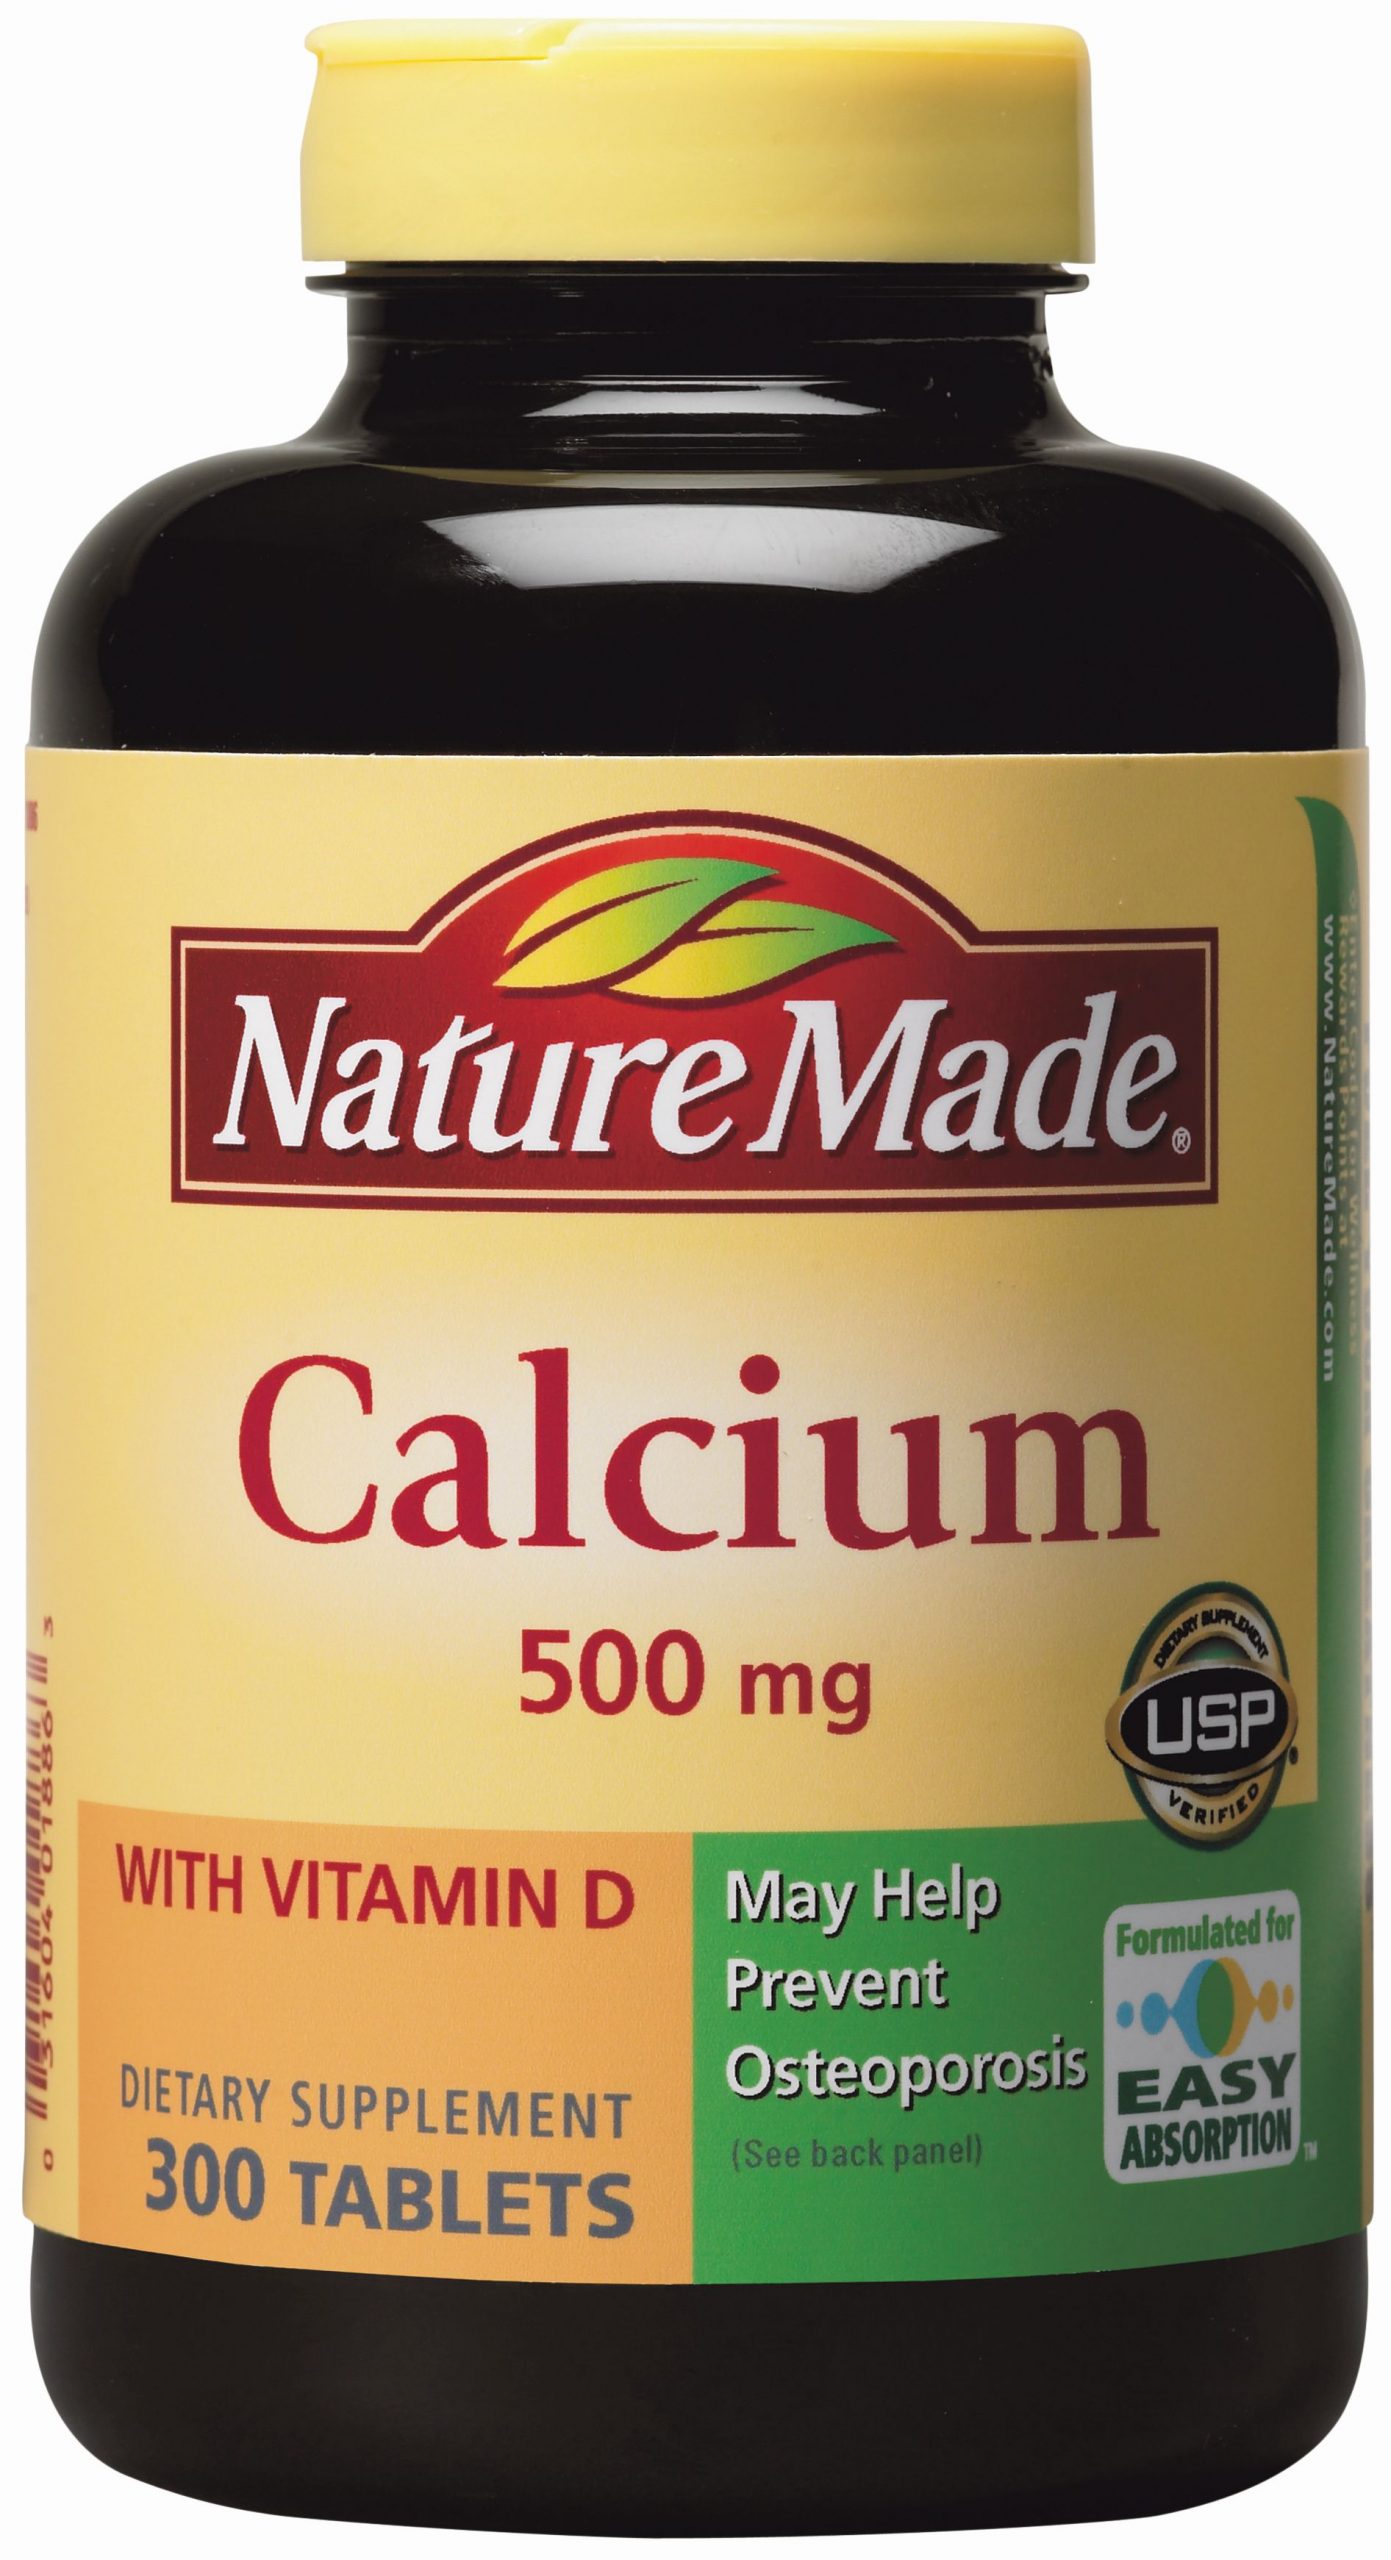 Nature Made Calcium 500 mg with Vitamin D, 300 Tablets